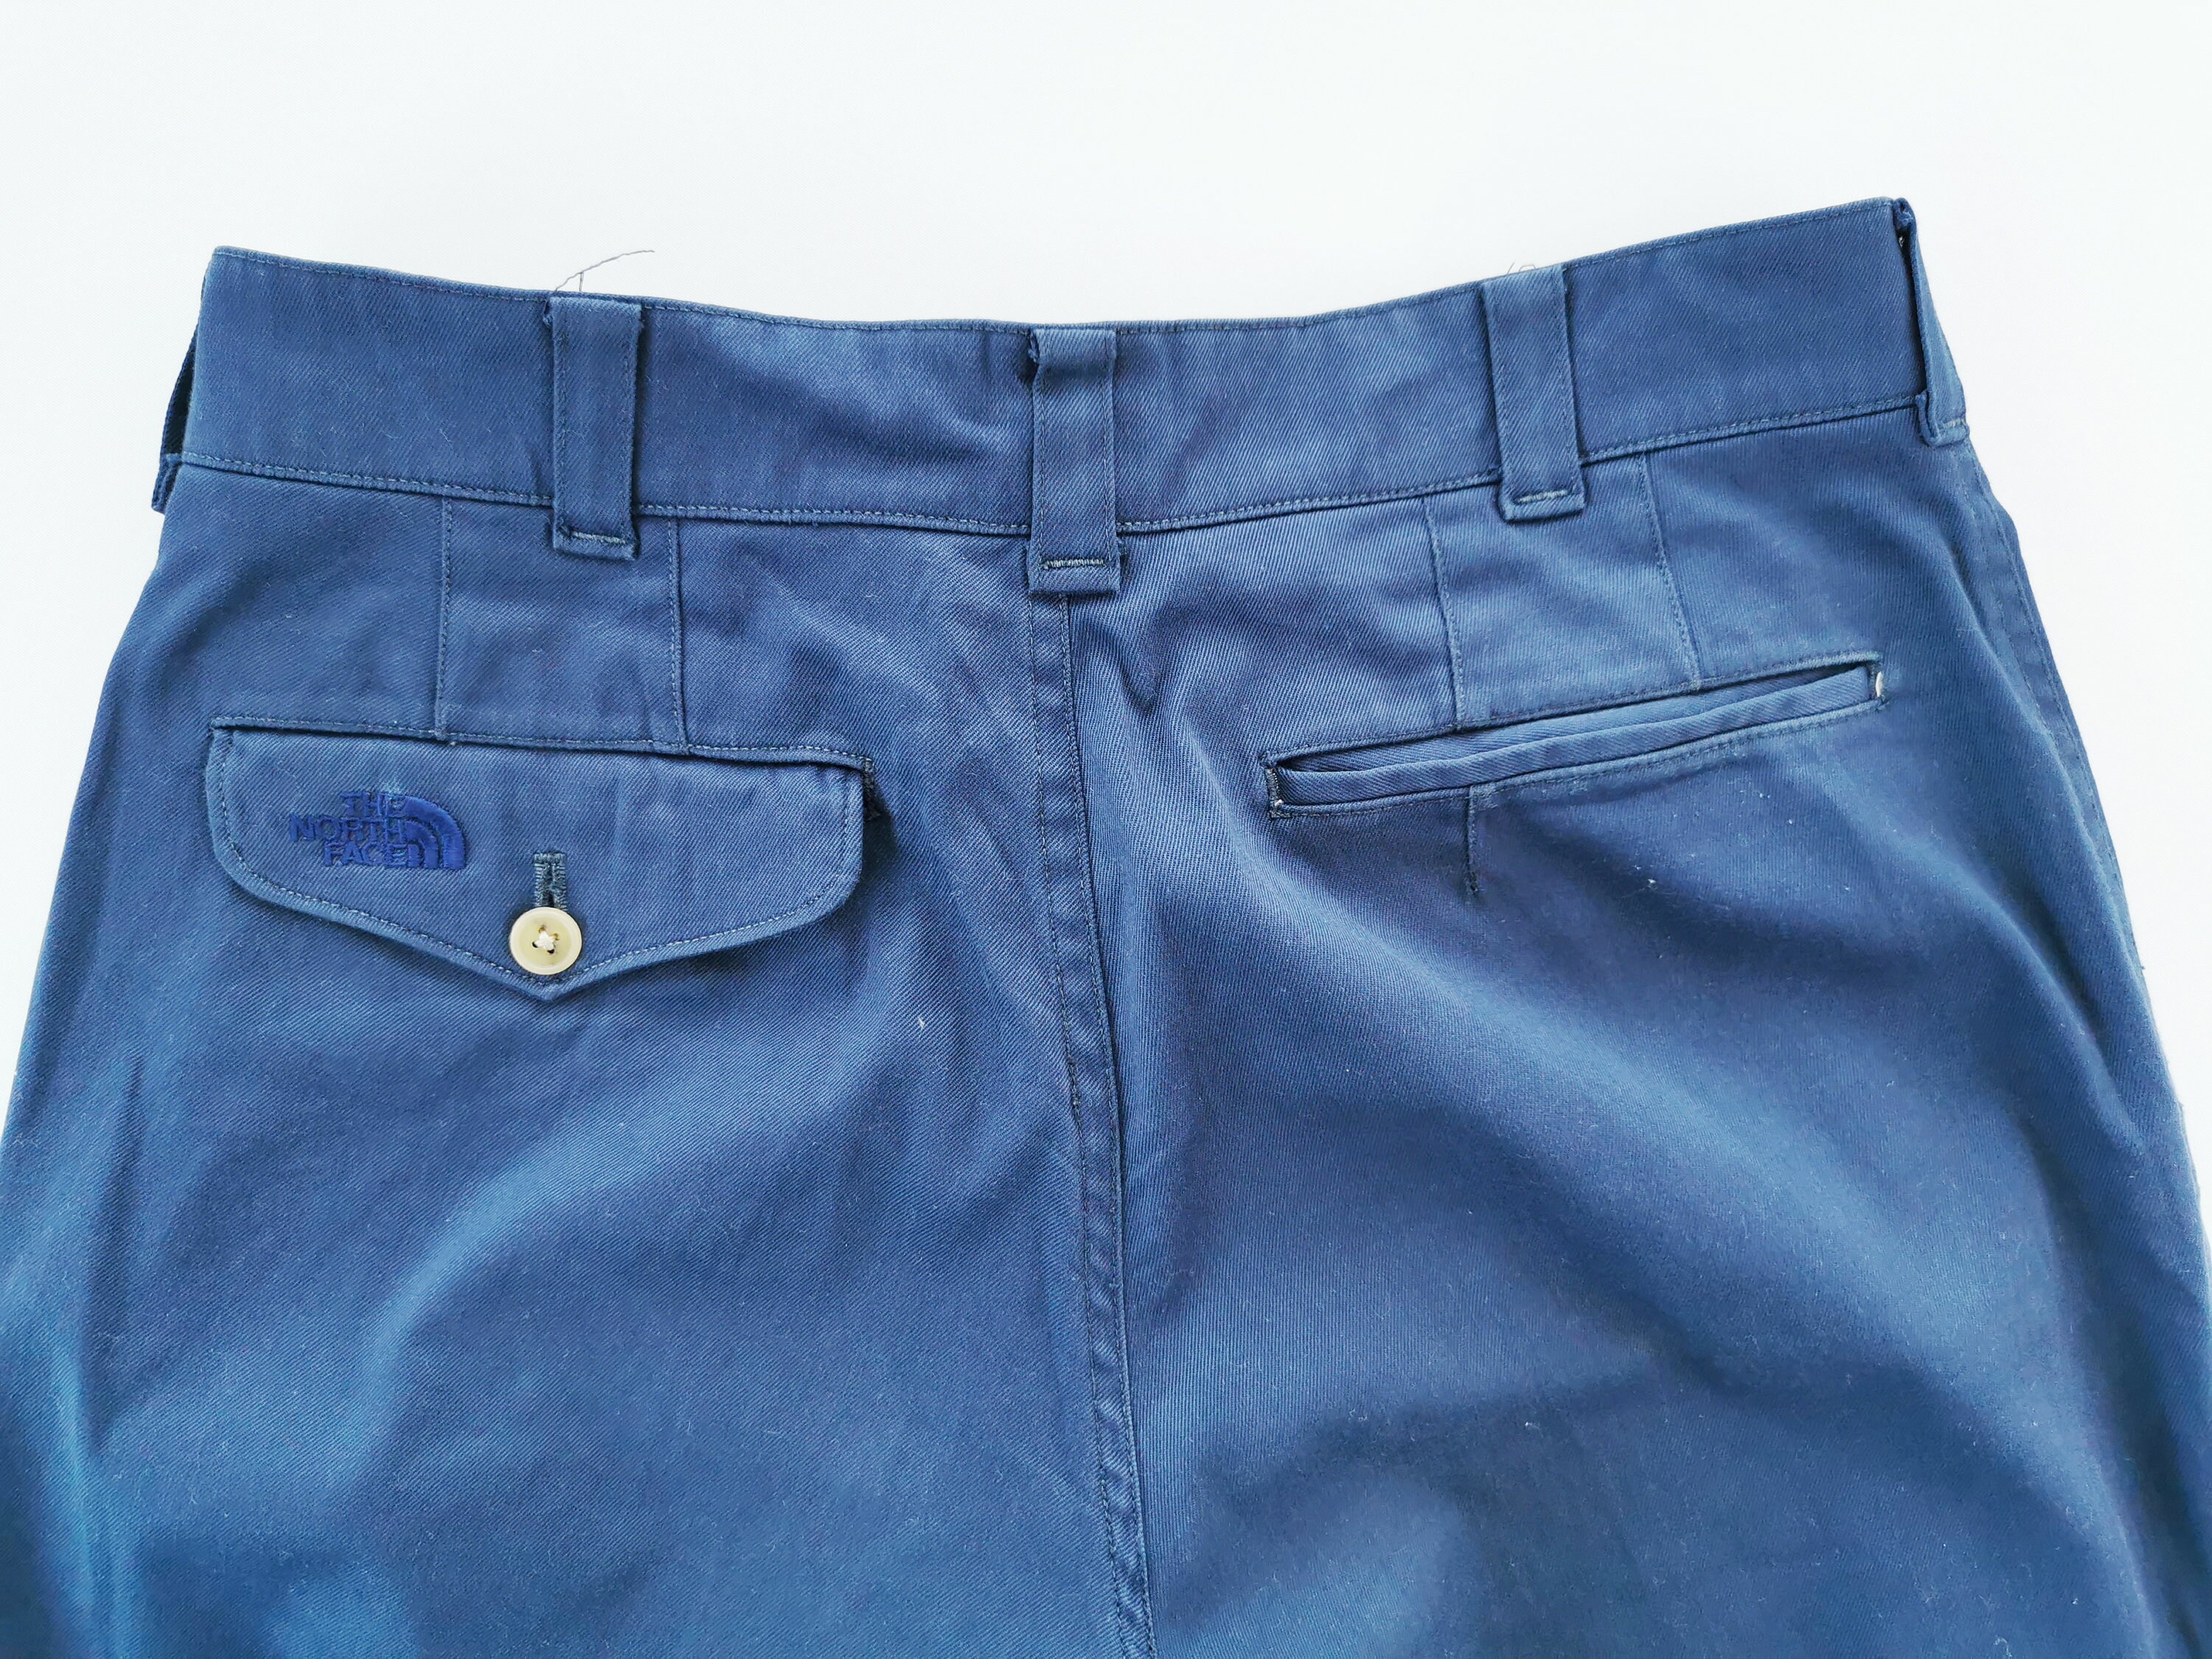 The North Face Pants Vintage the North Face Made in Japan - Etsy